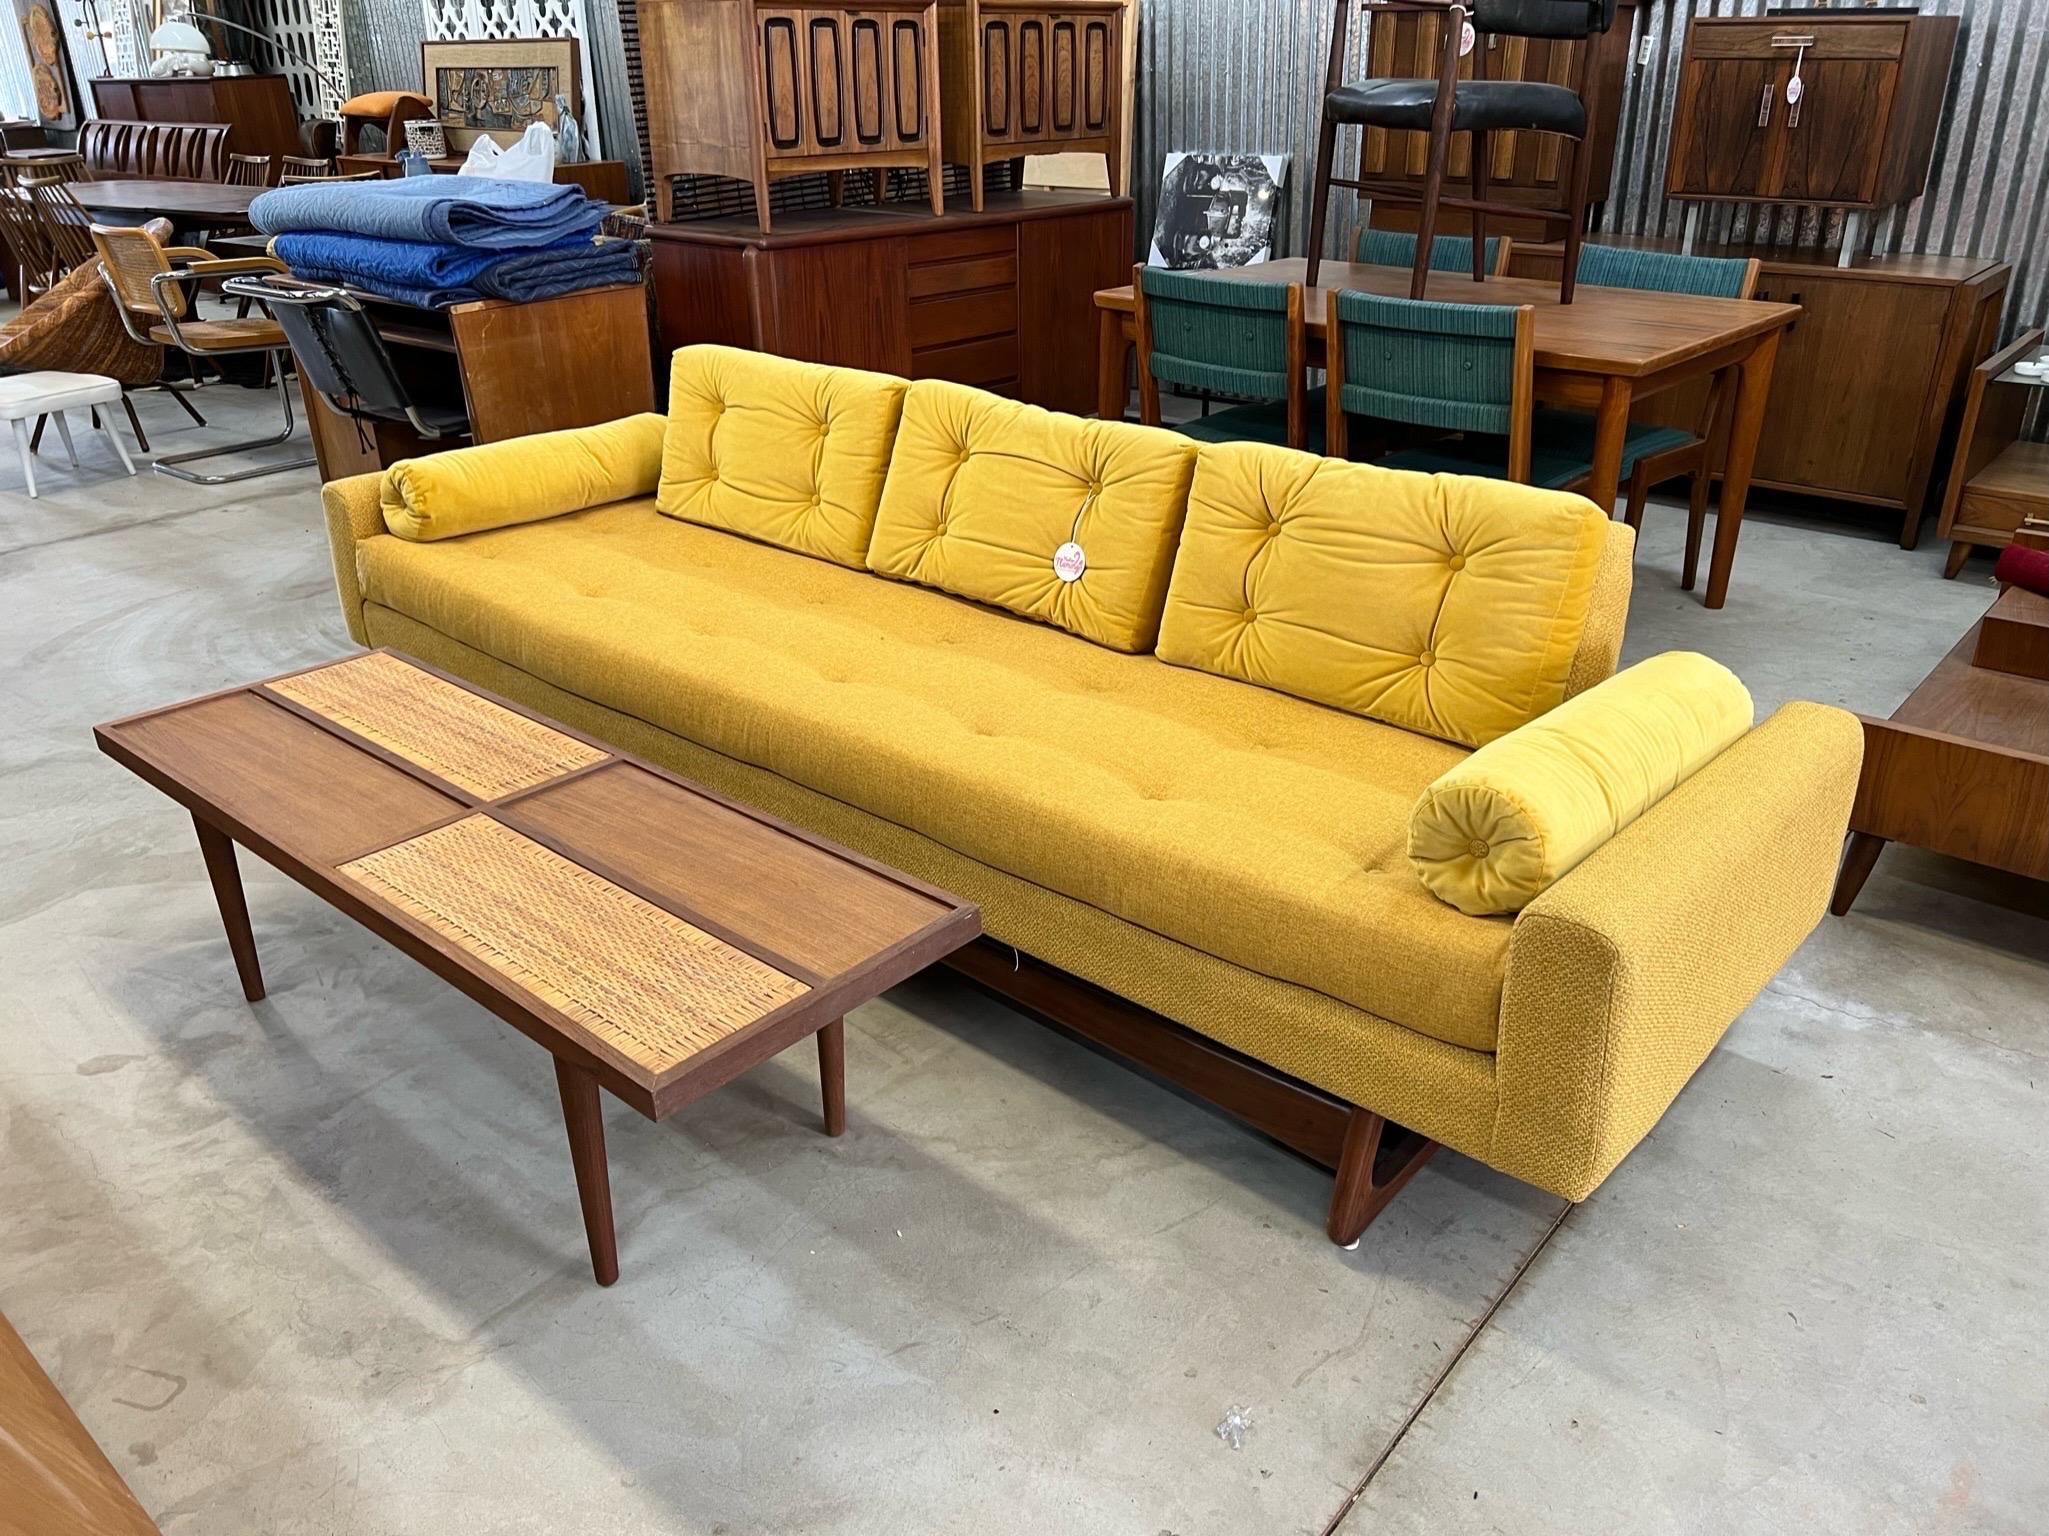 This is a beautiful and authentic Adrian Pearsall 2408 sofa circa 1960’s. It has been fully restored with all new foam, straps and fabric. All the walnut has been professionally restored and looks amazing. We chose to do a combination of three